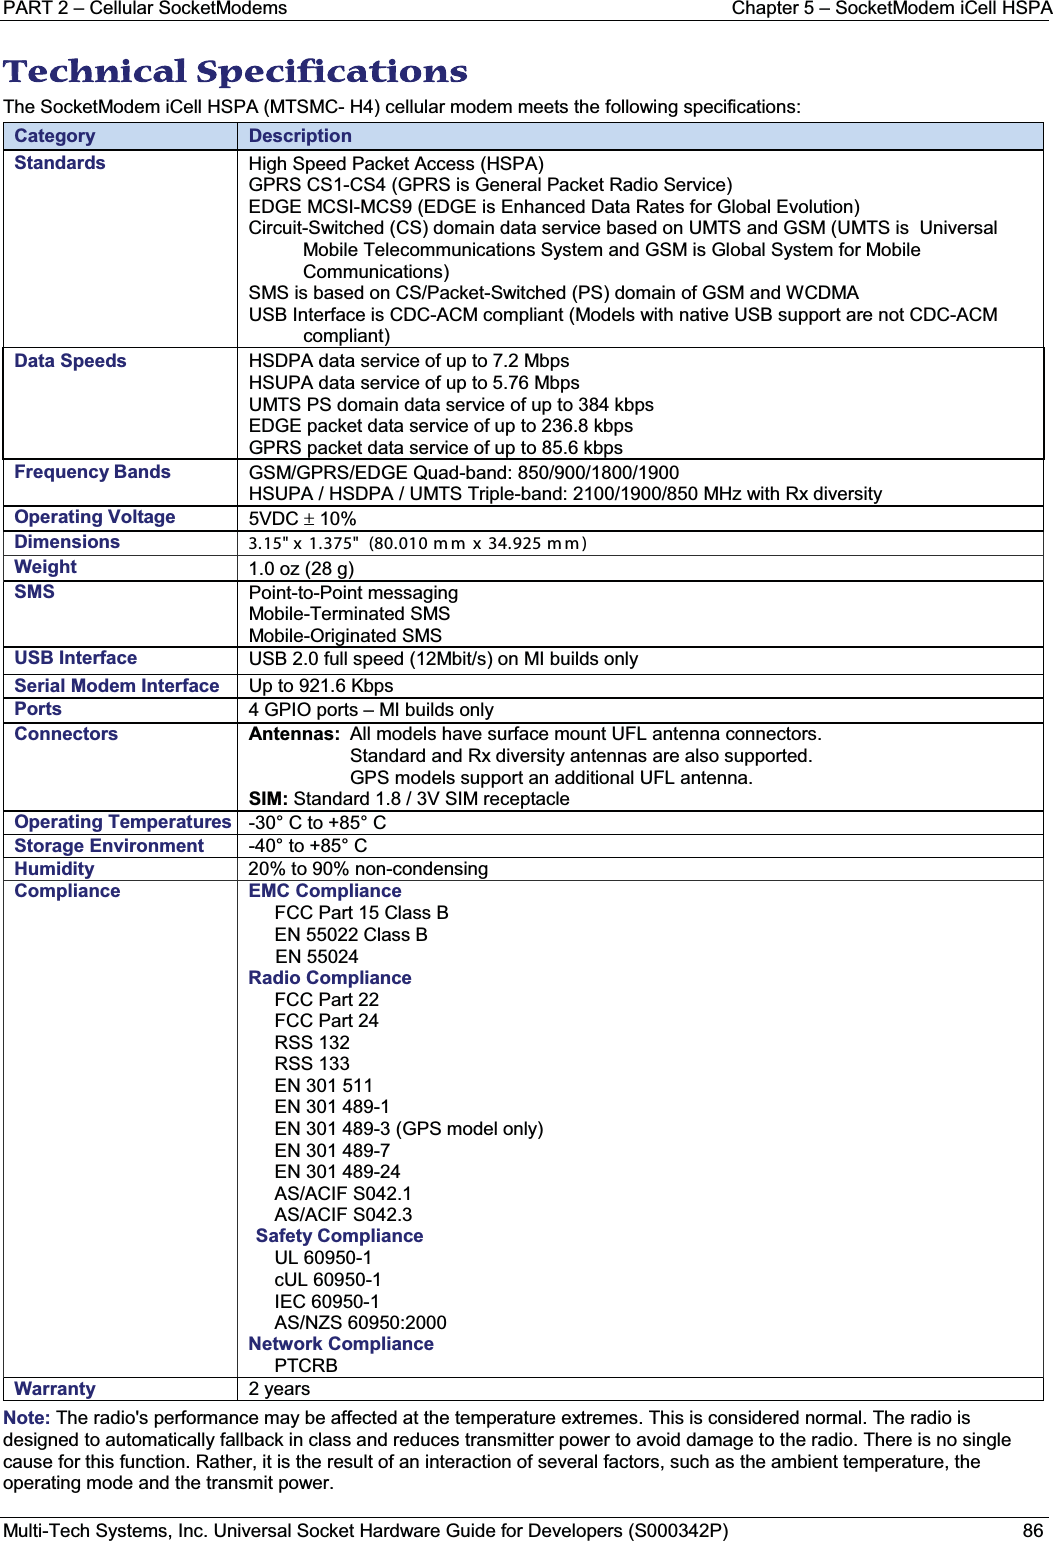 PART 2 – Cellular SocketModems Chapter 5 – SocketModem iCell HSPAMulti-Tech Systems, Inc. Universal Socket Hardware Guide for Developers (S000342P) 86TTechnical Specifications   The SocketModem iCell HSPA (MTSMC- H4) cellular modem meets the following specifications:Category DescriptionStandards High Speed Packet Access (HSPA)GPRS CS1-CS4 (GPRS is General Packet Radio Service)EDGE MCSI-MCS9 (EDGE is Enhanced Data Rates for Global Evolution)Circuit-Switched (CS) domain data service based on UMTS and GSM (UMTS is  Universal Mobile Telecommunications System and GSM is Global System for MobileCommunications)SMS is based on CS/Packet-Switched (PS) domain of GSM and WCDMAUSB Interface is CDC-ACM compliant (Models with native USB support are not CDC-ACM compliant)Data Speeds HSDPA data service of up to 7.2 Mbps HSUPA data service of up to 5.76 MbpsUMTS PS domain data service of up to 384 kbpsEDGE packet data service of up to 236.8 kbpsGPRS packet data service of up to 85.6 kbpsFrequency Bands GSM/GPRS/EDGE Quad-band: 850/900/1800/1900HSUPA / HSDPA / UMTS Triple-band: 2100/1900/850 MHz with Rx diversityOperating Voltage 5VDC r10%     Dimensions 3.15&quot; x 1.375&quot;  (80.010 m m  x 34.925 m m )Weight 1.0 oz (28 g)SMS Point-to-Point messagingMobile-Terminated SMSMobile-Originated SMSUSB Interface USB 2.0 full speed (12Mbit/s) on MI builds onlySerial Modem Interface Up to 921.6 KbpsPorts 4 GPIO ports – MI builds onlyConnectors Antennas: All models have surface mount UFL antenna connectors.Standard and Rx diversity antennas are also supported.GPS models support an additional UFL antenna.SIM: Standard 1.8 / 3V SIM receptacleOperating Temperatures -30° C to +85° CStorage Environment -40° to +85° CHumidity 20% to 90% non-condensingCompliance EMC ComplianceFCC Part 15 Class BEN 55022 Class BEN 55024Radio ComplianceFCC Part 22FCC Part 24RSS 132RSS 133EN 301 511EN 301 489-1EN 301 489-3 (GPS model only)EN 301 489-7EN 301 489-24AS/ACIF S042.1AS/ACIF S042.3Safety ComplianceUL 60950-1cUL 60950-1IEC 60950-1AS/NZS 60950:2000Network Compliance PTCRBWarranty 2 yearsNote: The radio&apos;s performance may be affected at the temperature extremes. This is considered normal. The radio is designed to automatically fallback in class and reduces transmitter power to avoid damage to the radio. There is no single cause for this function. Rather, it is the result of an interaction of several factors, such as the ambient temperature, the operating mode and the transmit power.